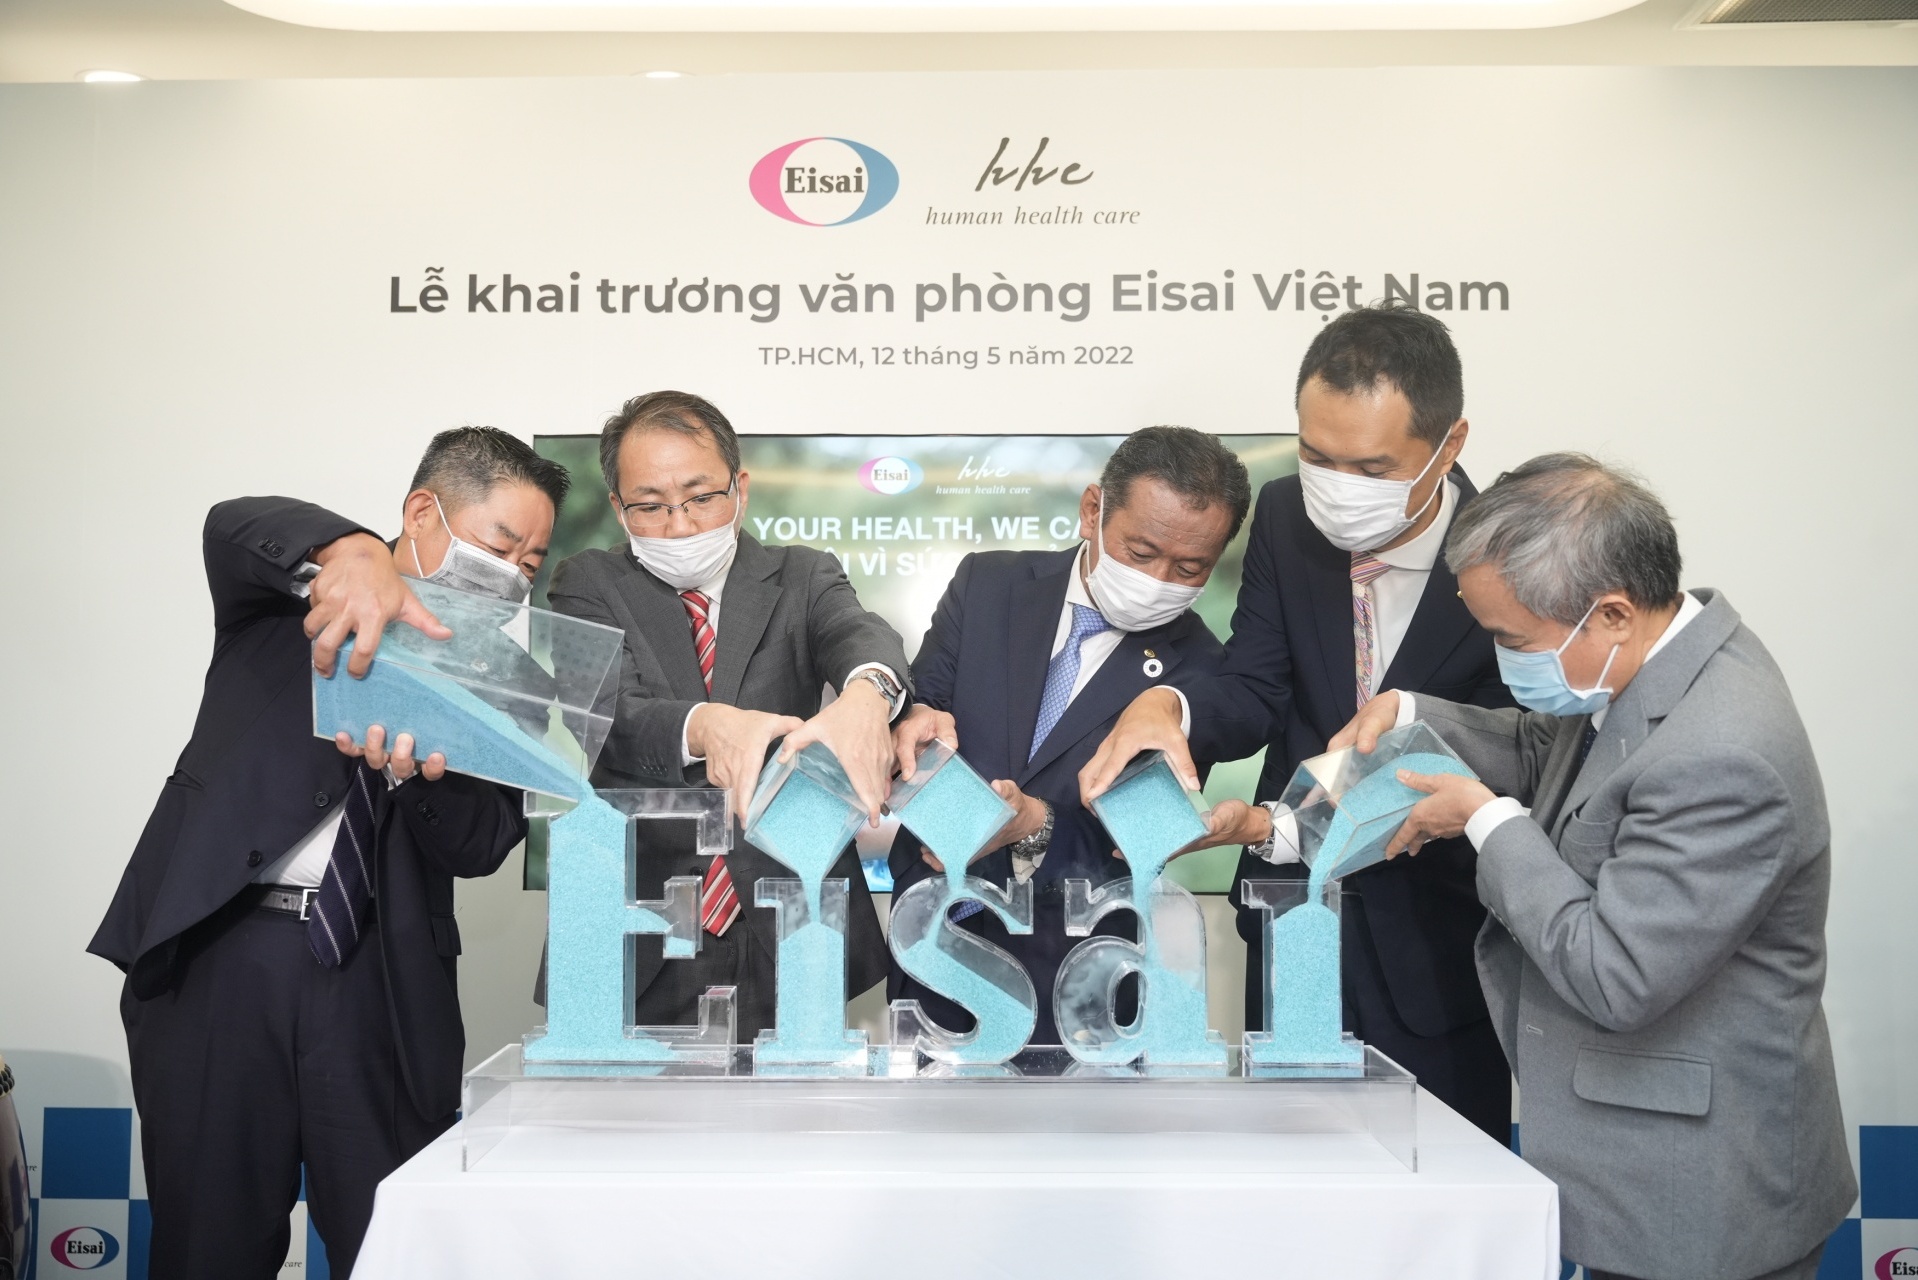 Eisai Vietnam opens new office and enters strategic partnership